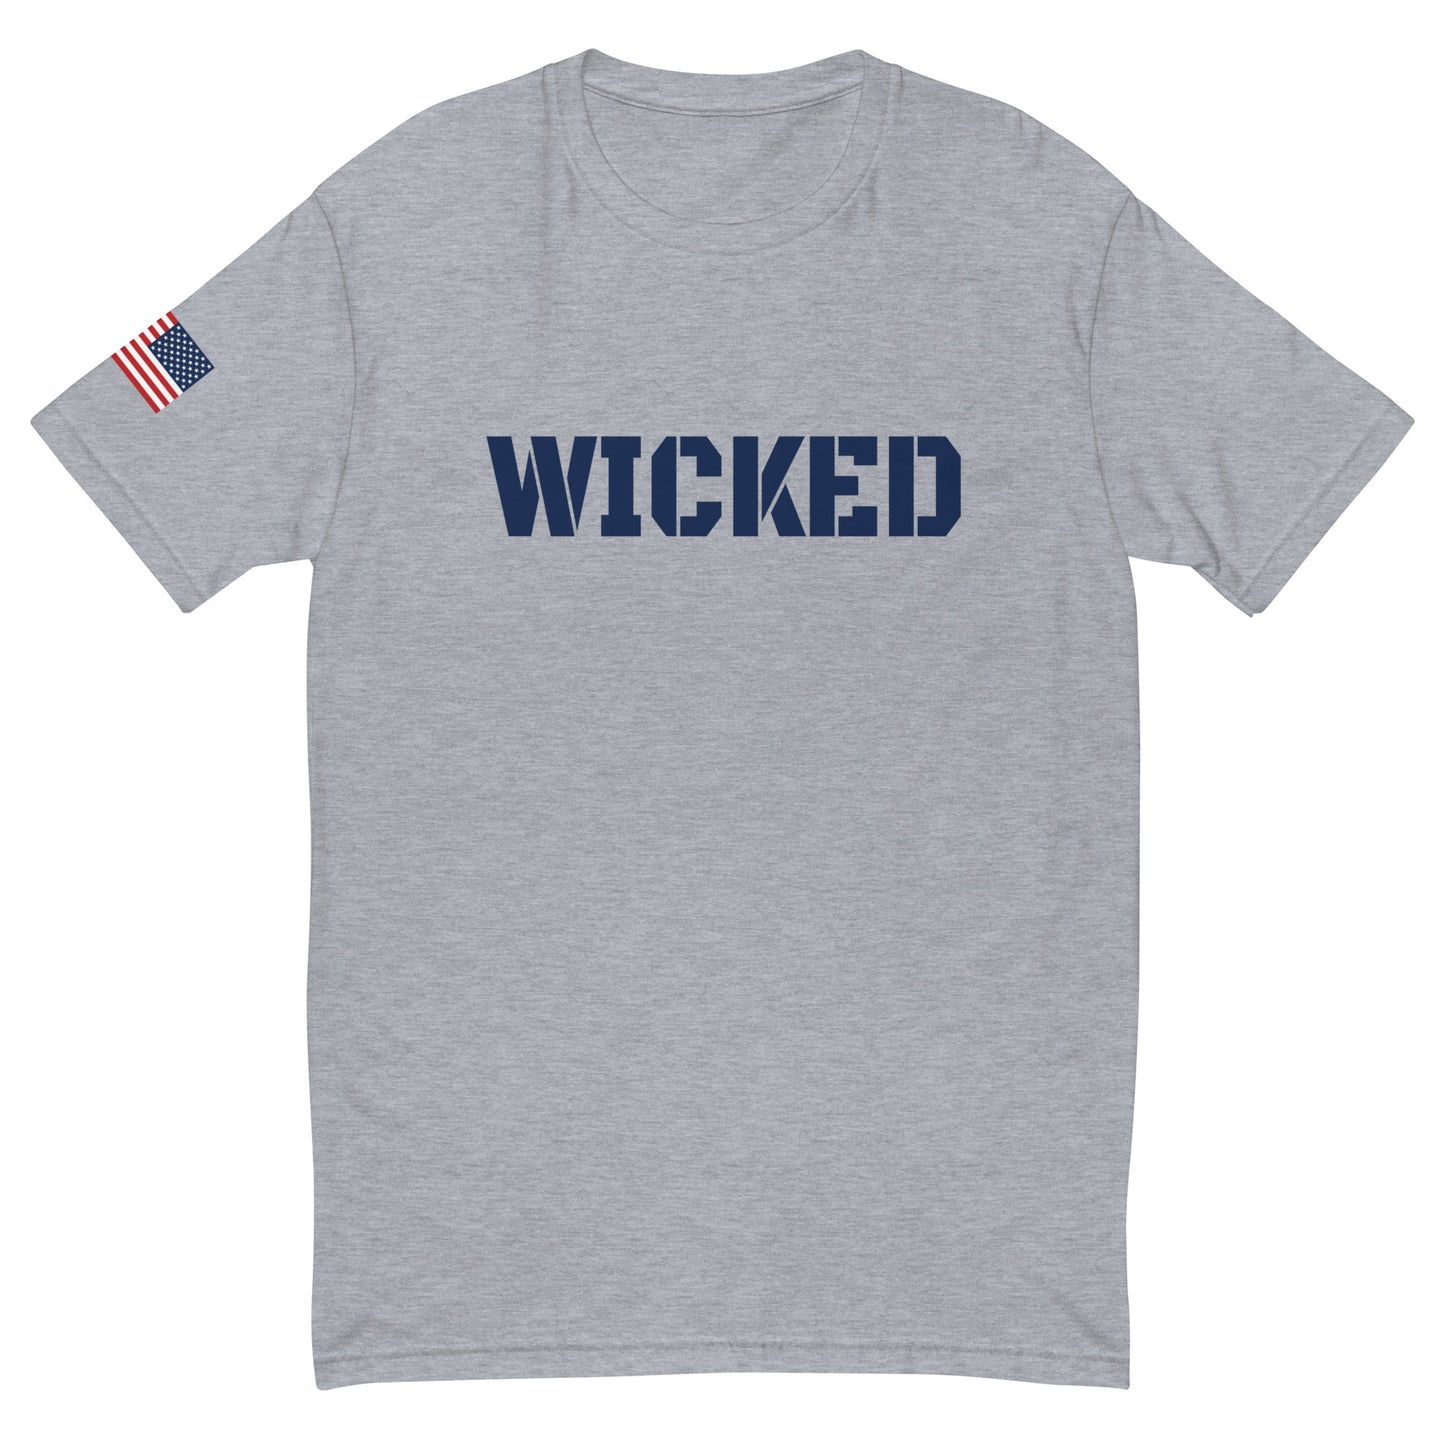 USA Wicked T-shirt